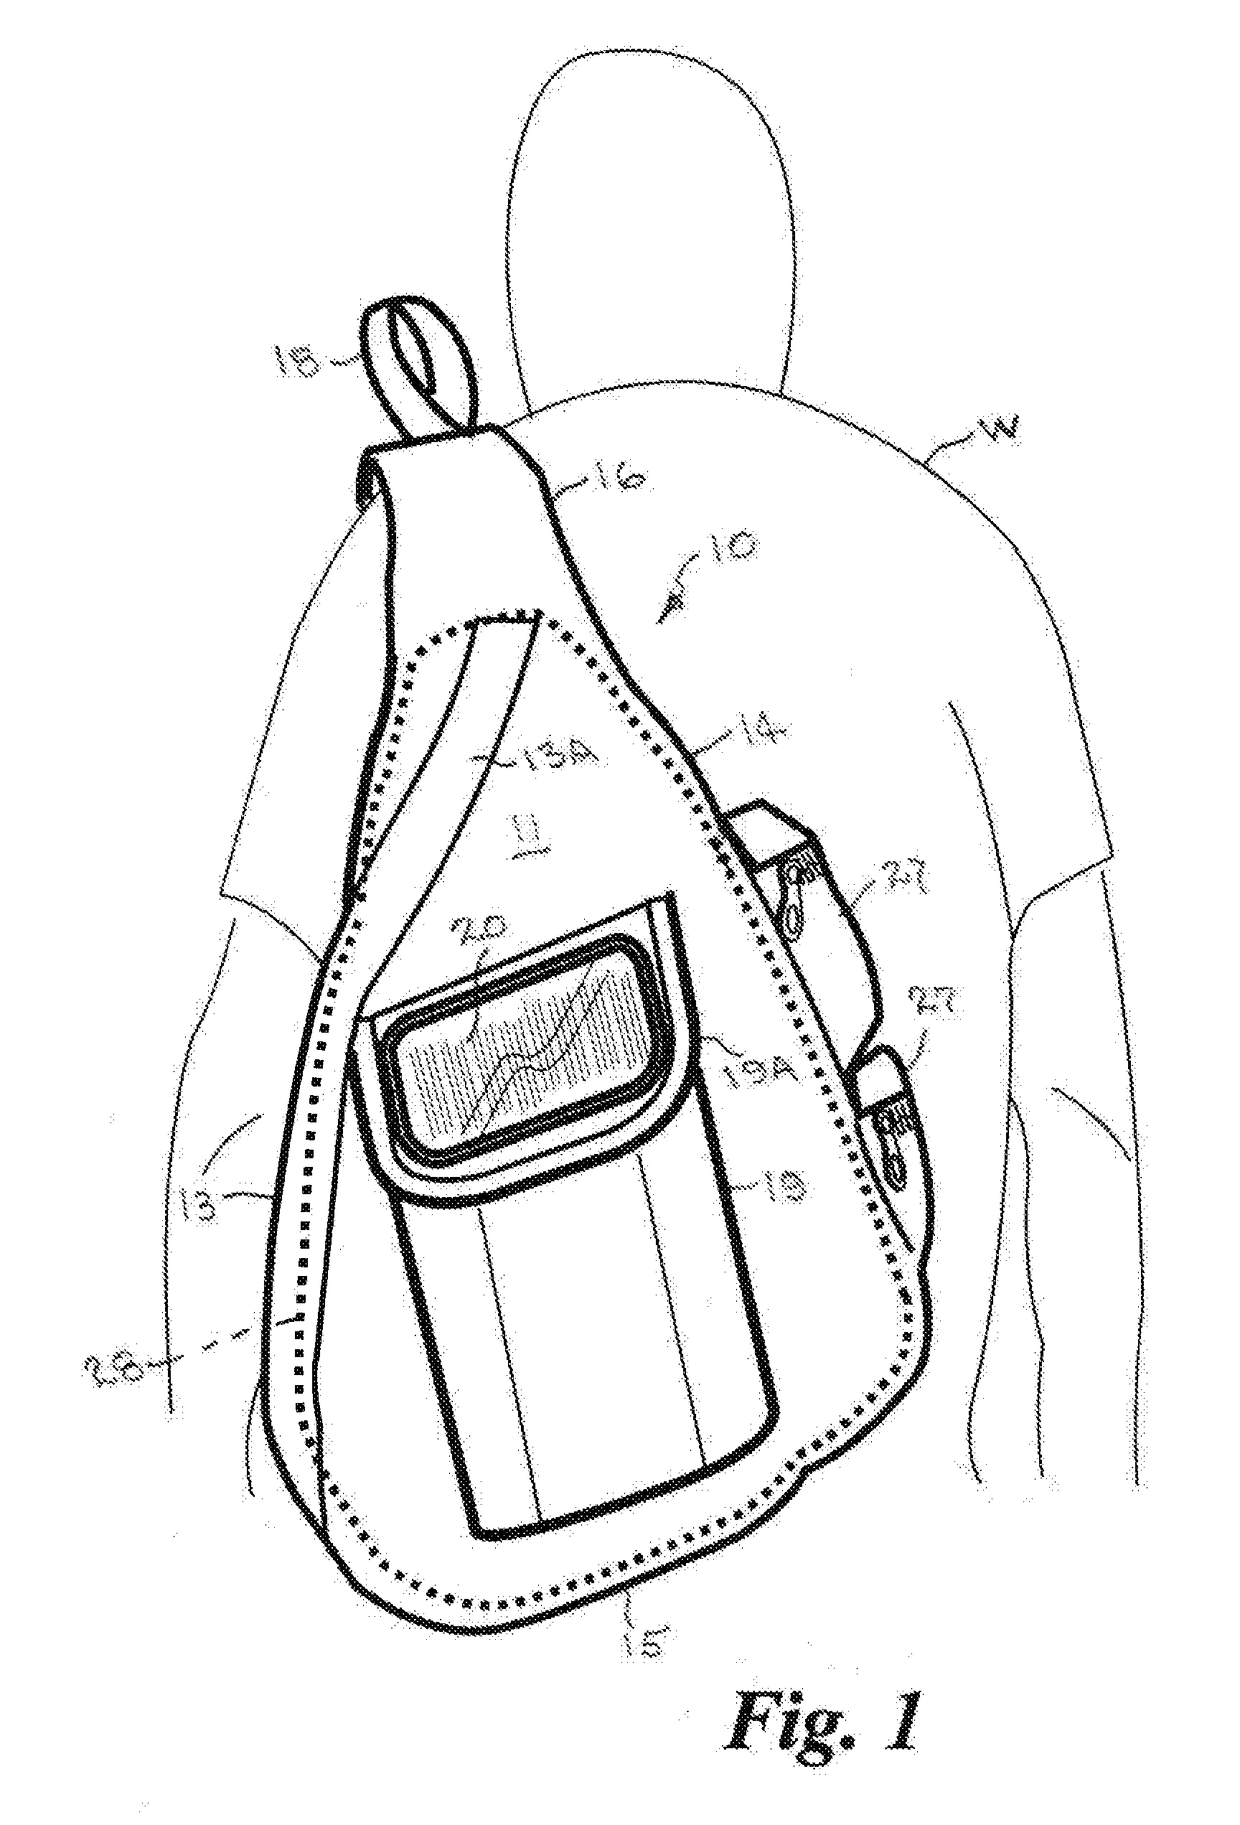 Bulletproof backpack with solar charger, concealed carry compartment, baton scabbard, and GPS module